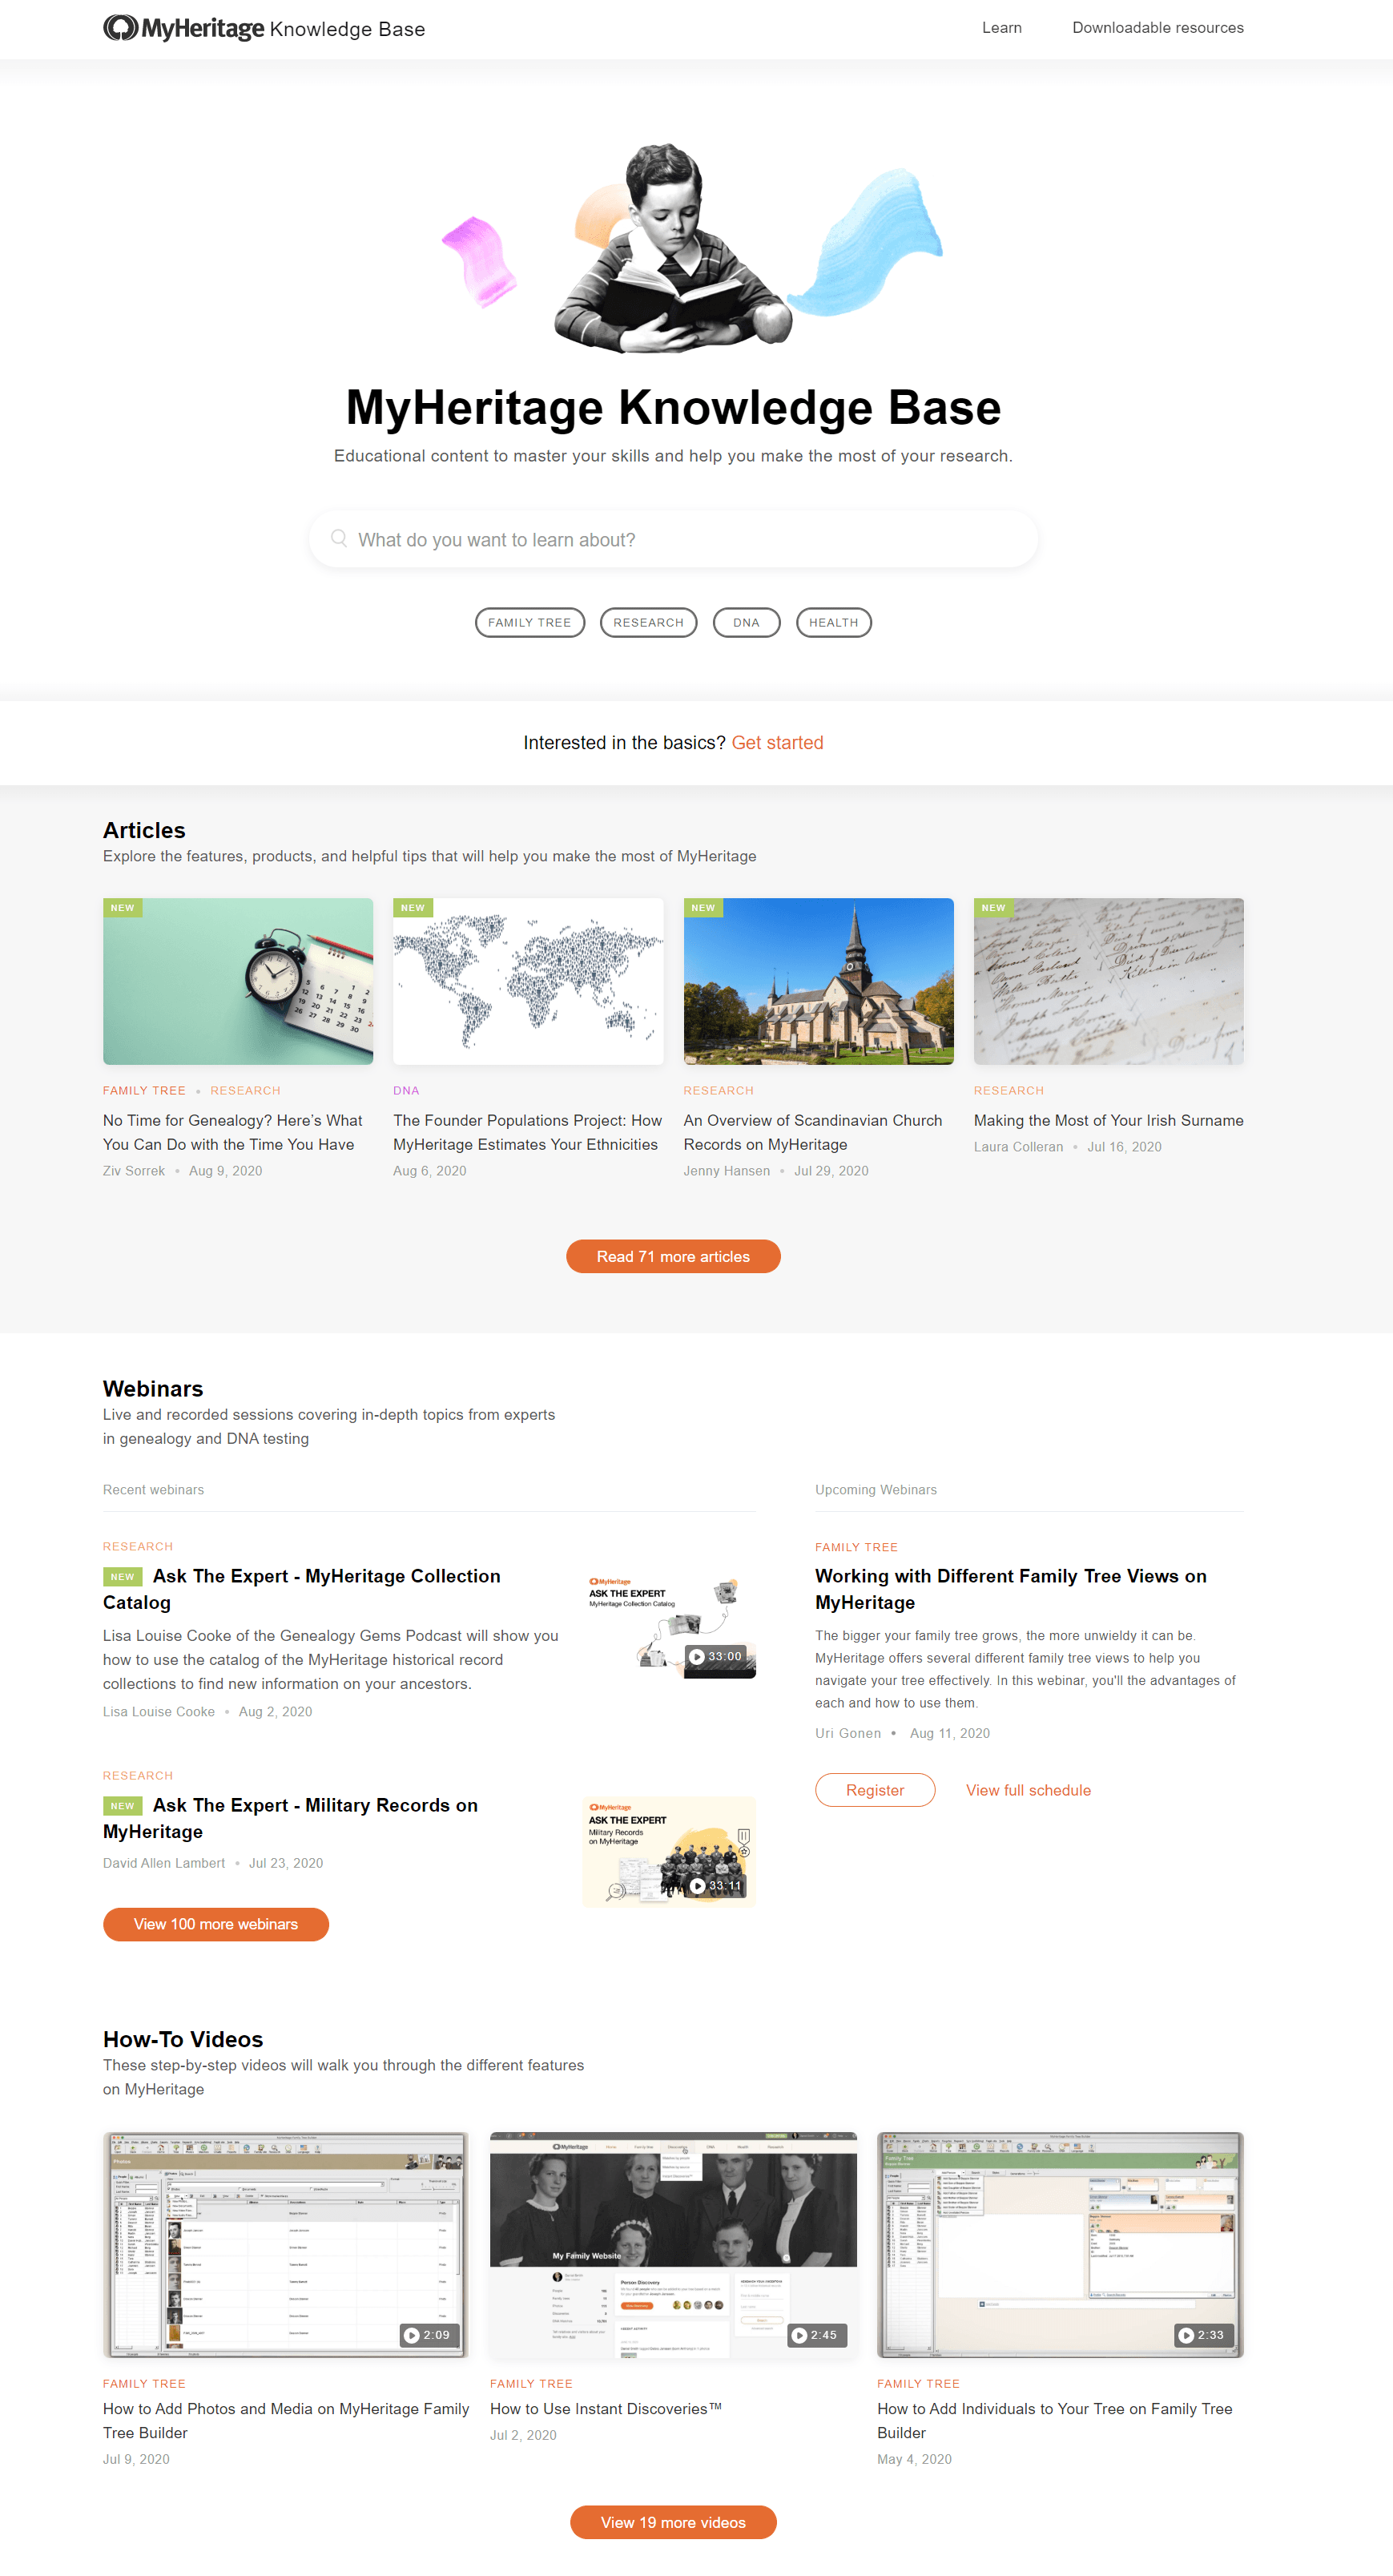 The new MyHeritage Knowledge Base homepage (click to zoom)